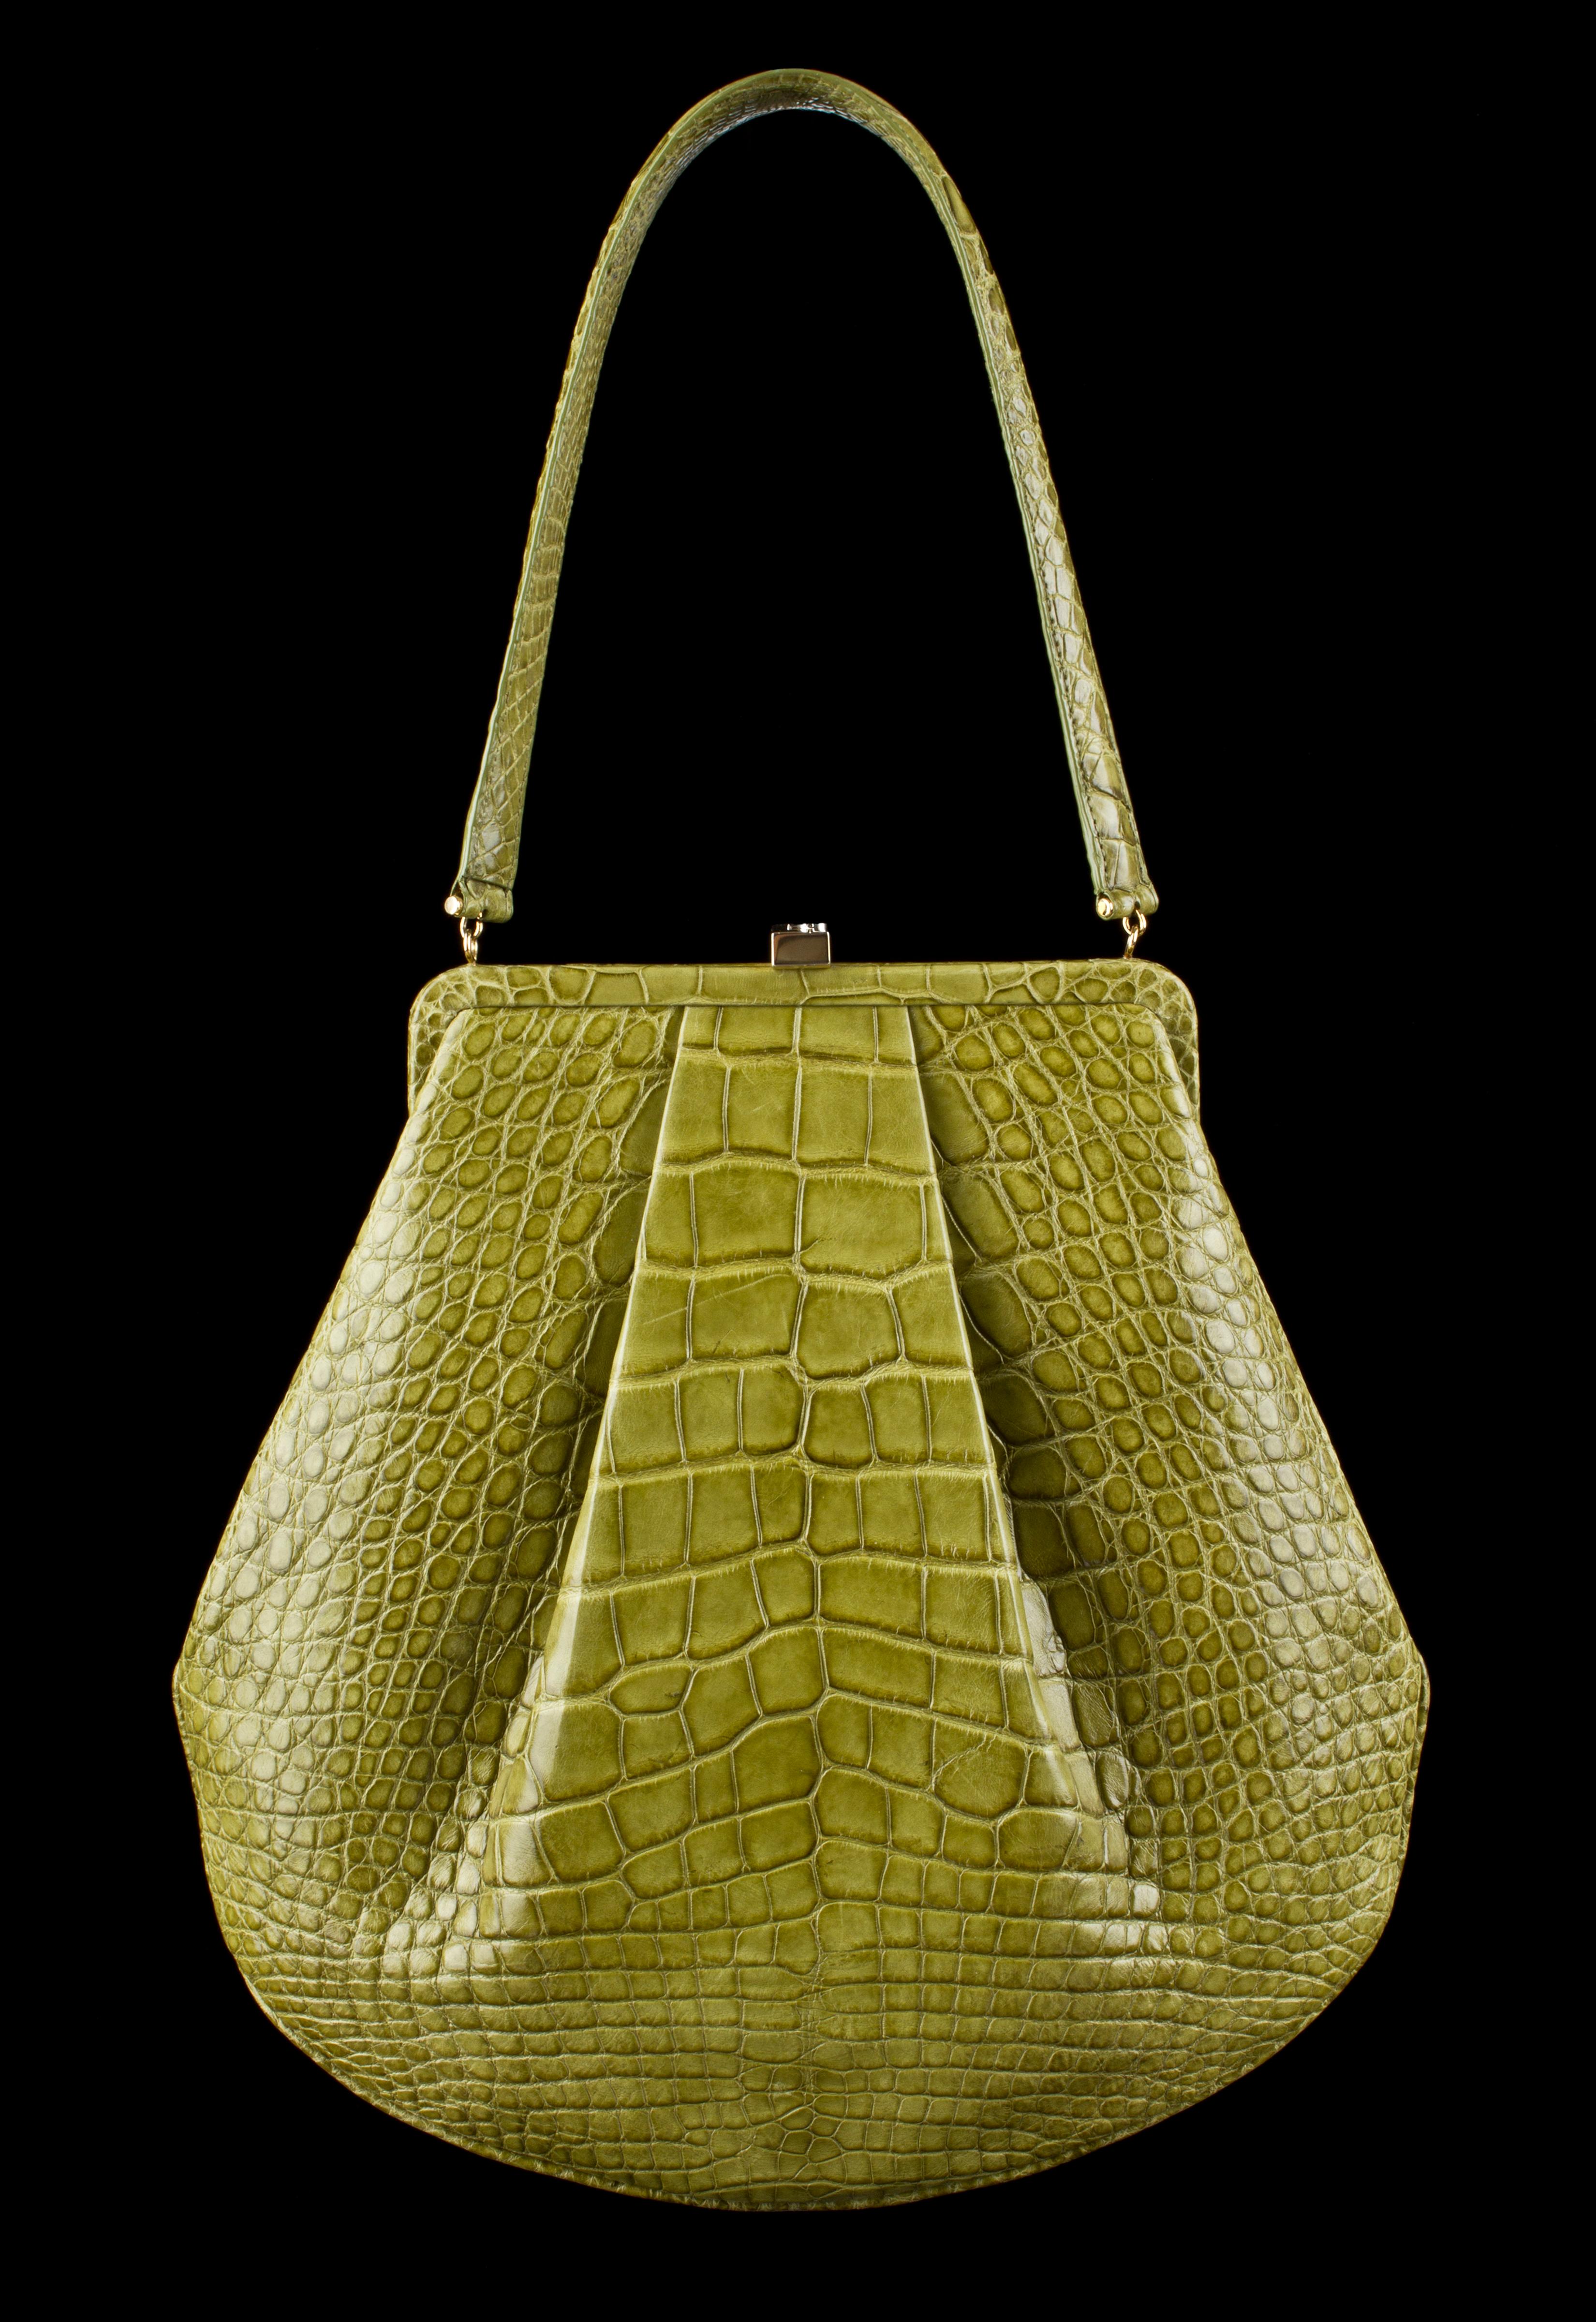 Lambertson Truex green genuine alligator framed shoulder bag. Pleat detail. Hinged frame with gold-tone signature clasp closure at top. Single alligator strap. Interior is light blue suede with alligator detail. Interior has cell phone pocket, two